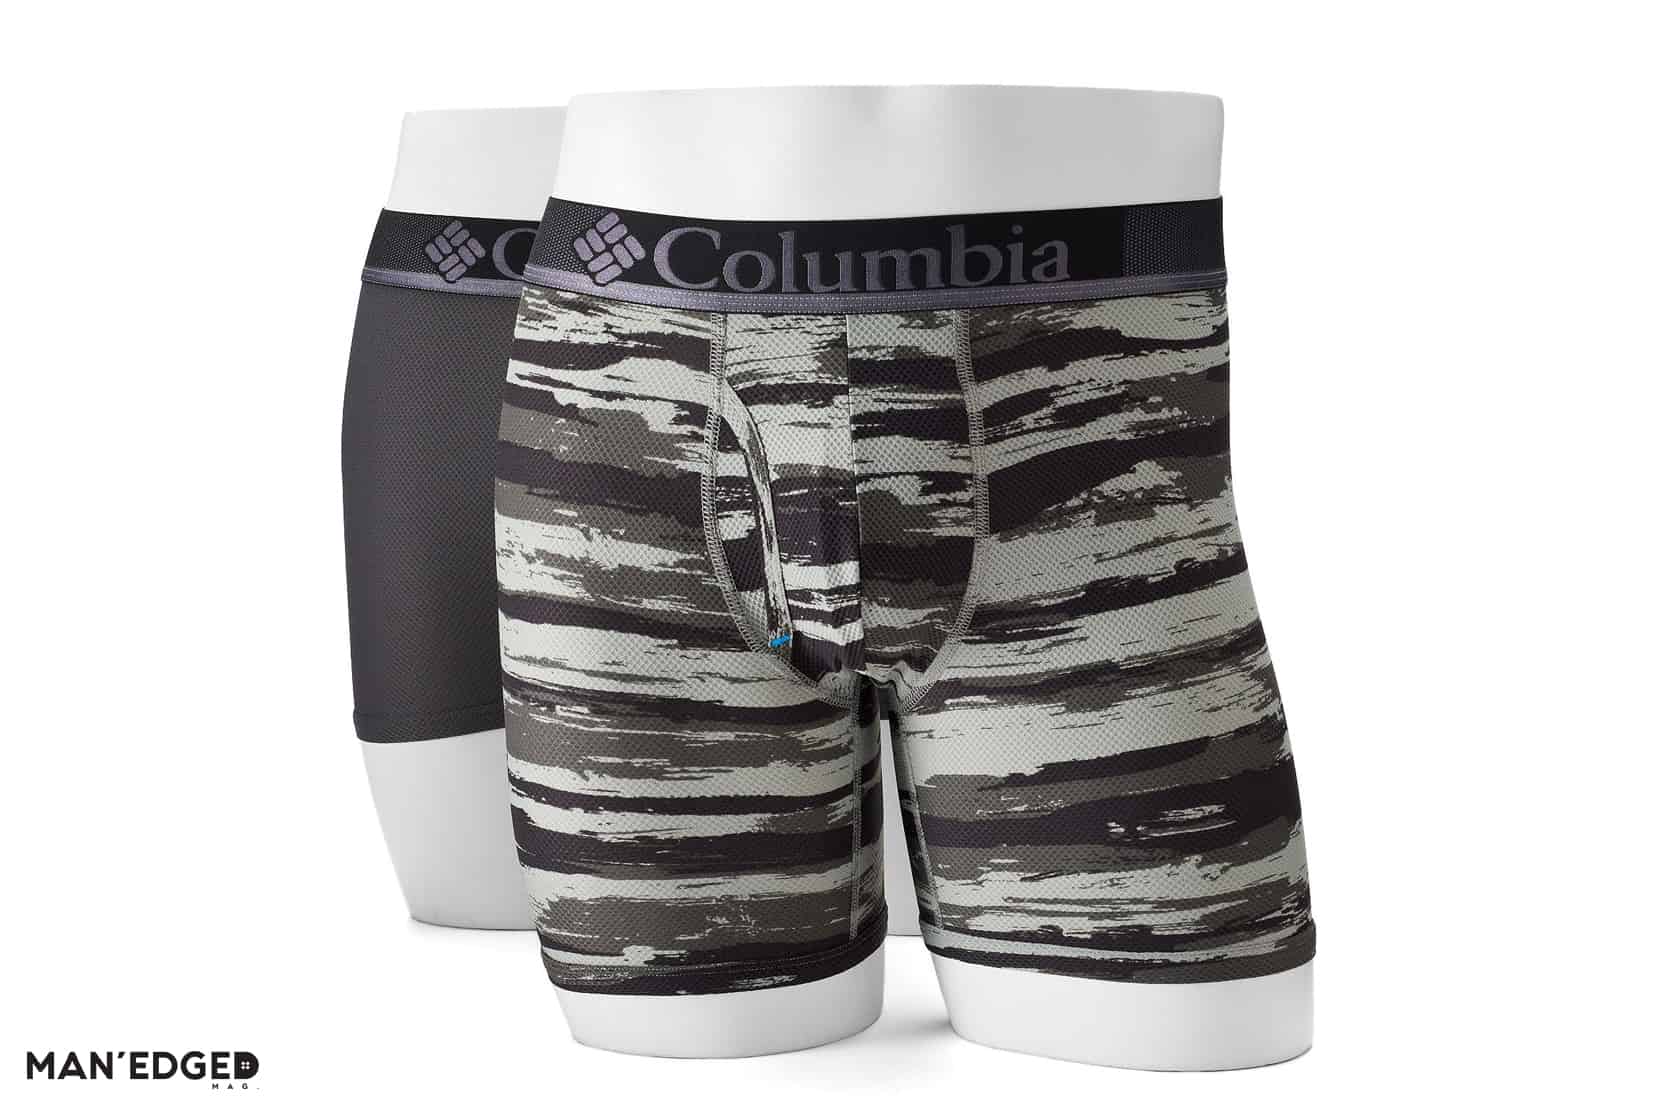 The Outdoorsman Gift Guide featuring Columbia Men's Boxer Briefs